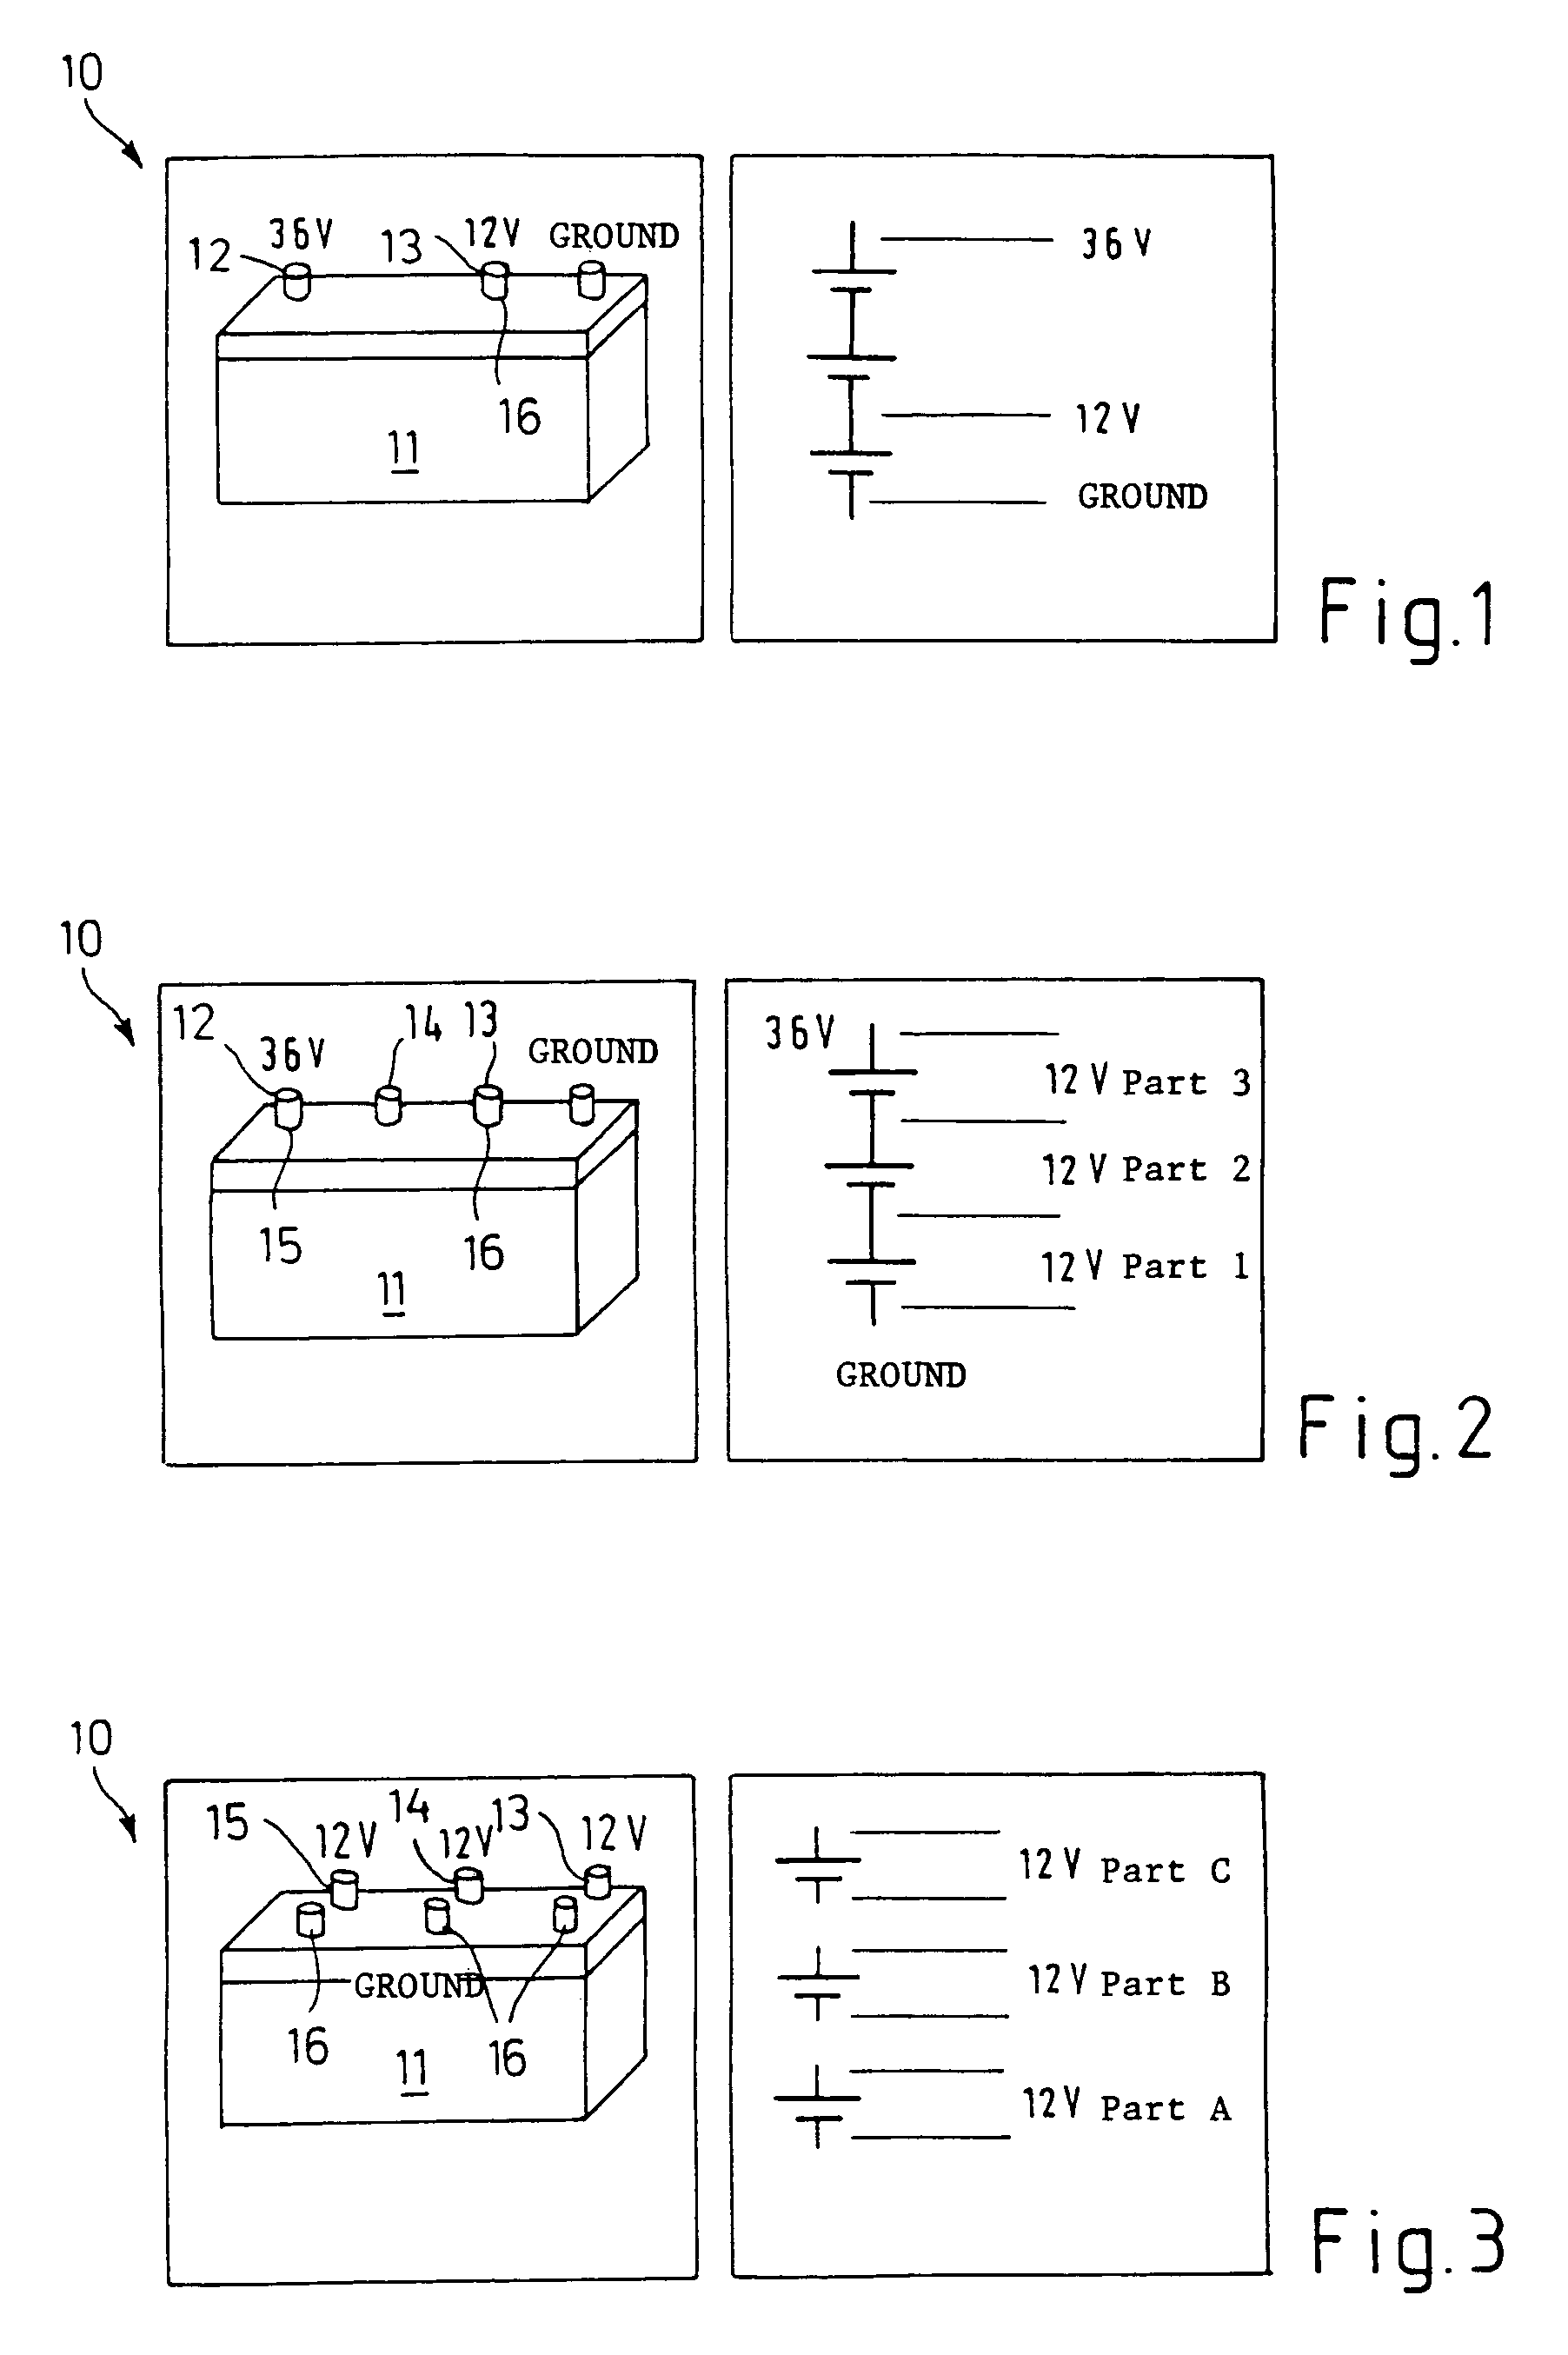 Multi-voltage power supply system and method for operating same